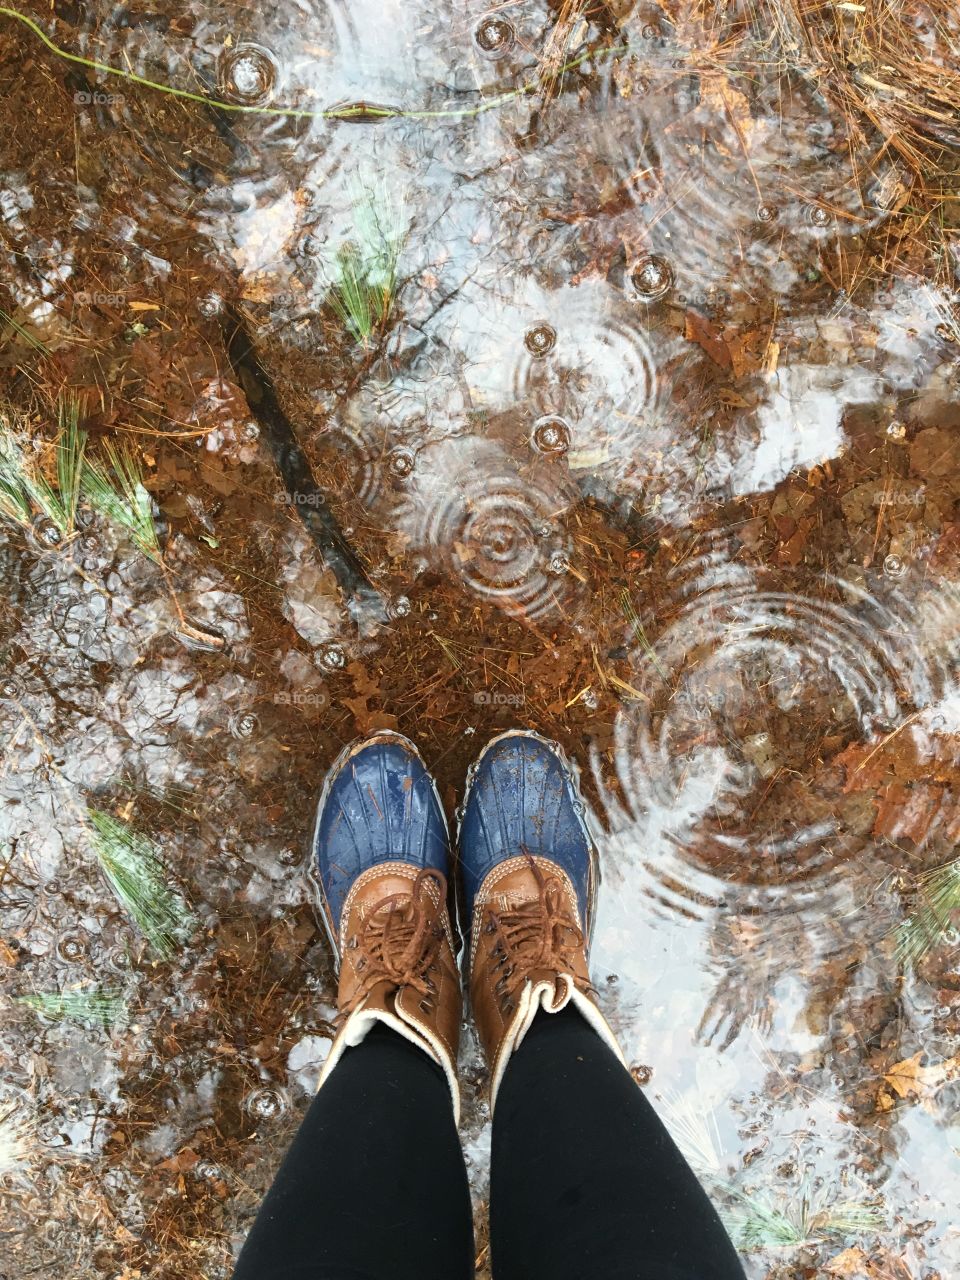 Rainy day, stepping in a puddle. 